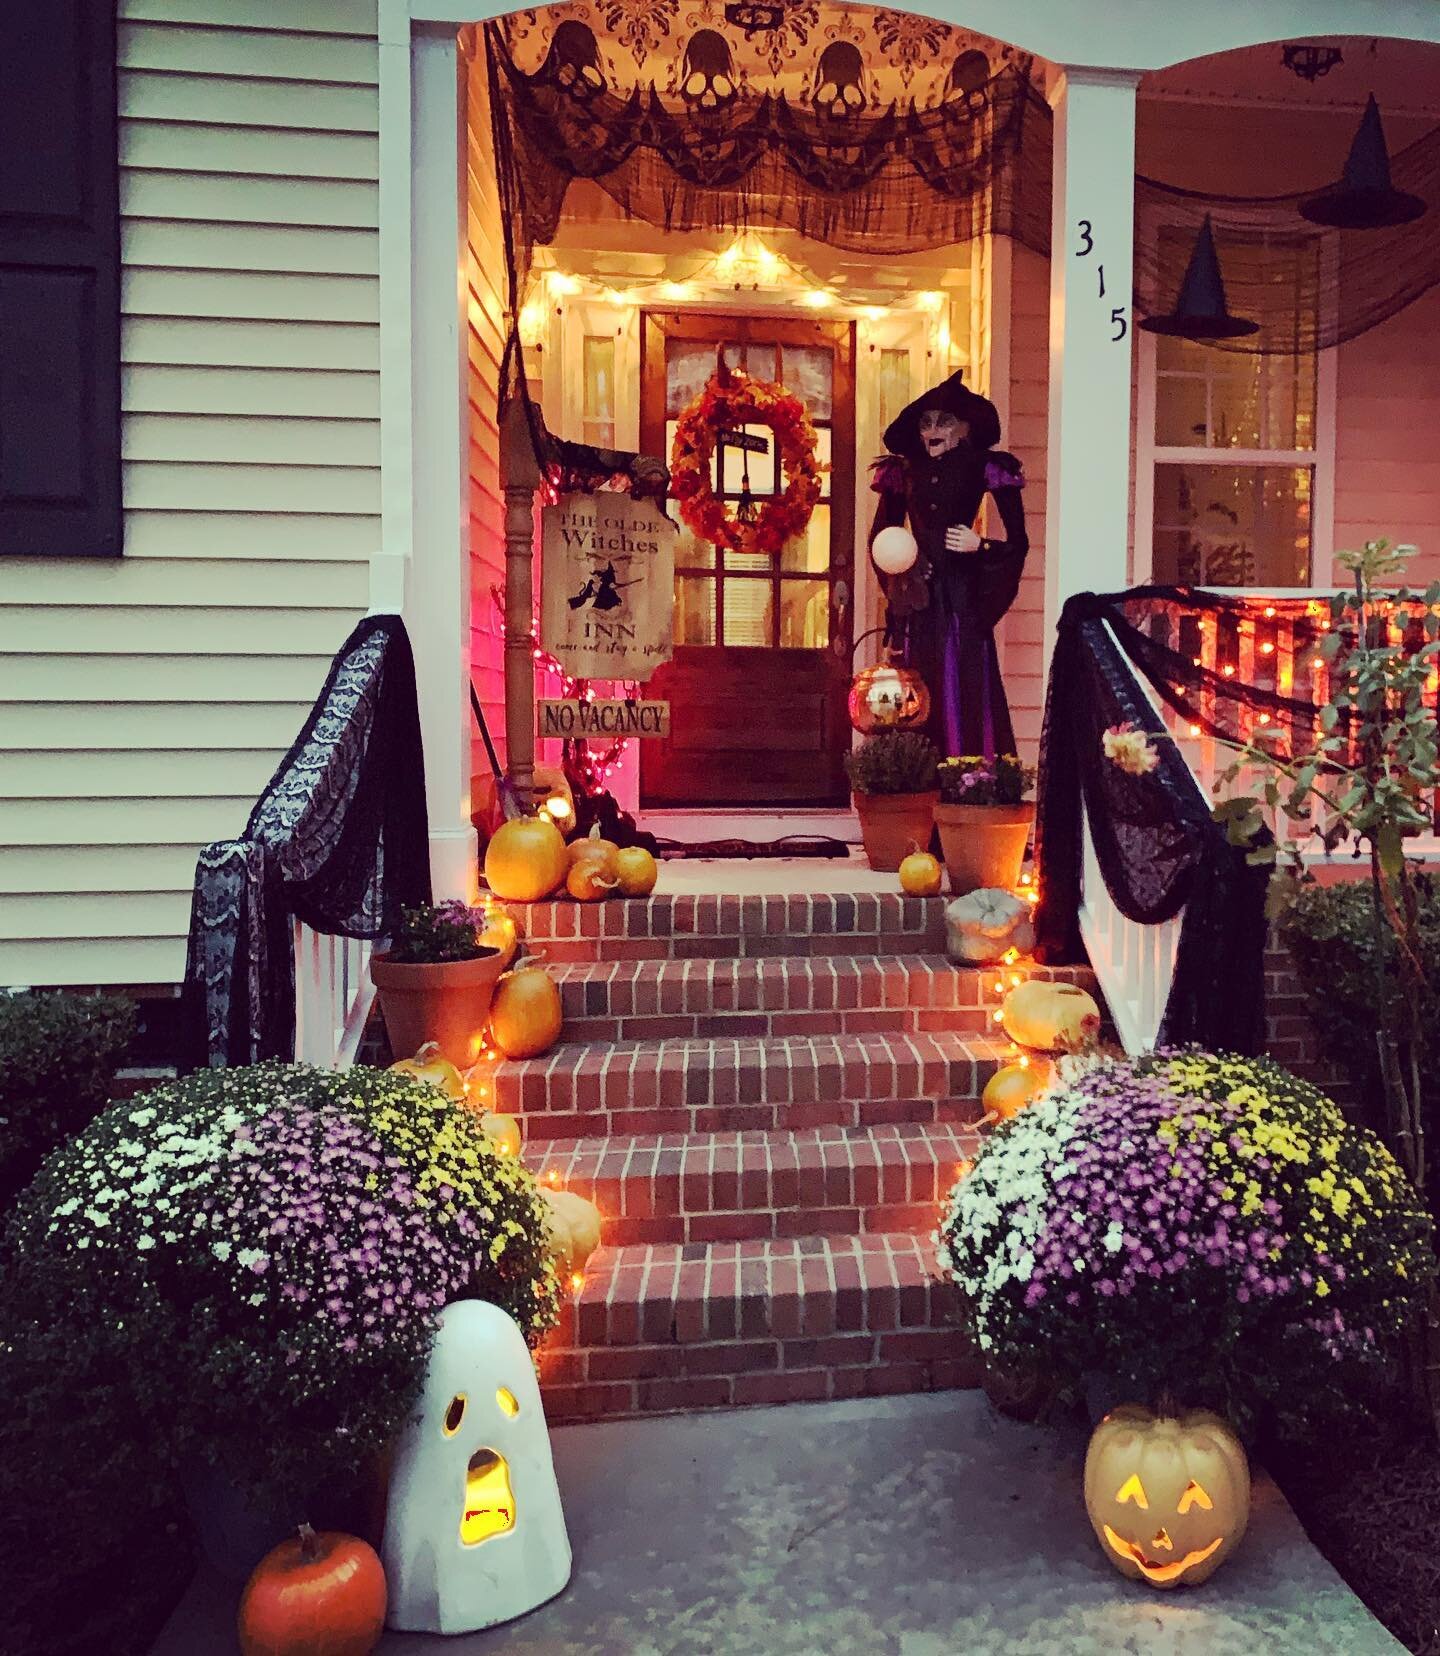 Welcome to the Olde Witches Inn! We think you&rsquo;ll love it here. 🍂👻🔮🎃💀🧹🖤🍁
.
.
.
.
.
#flakeflourishseason #halloween #halloweenporch #happyhalloween #halloweendiy